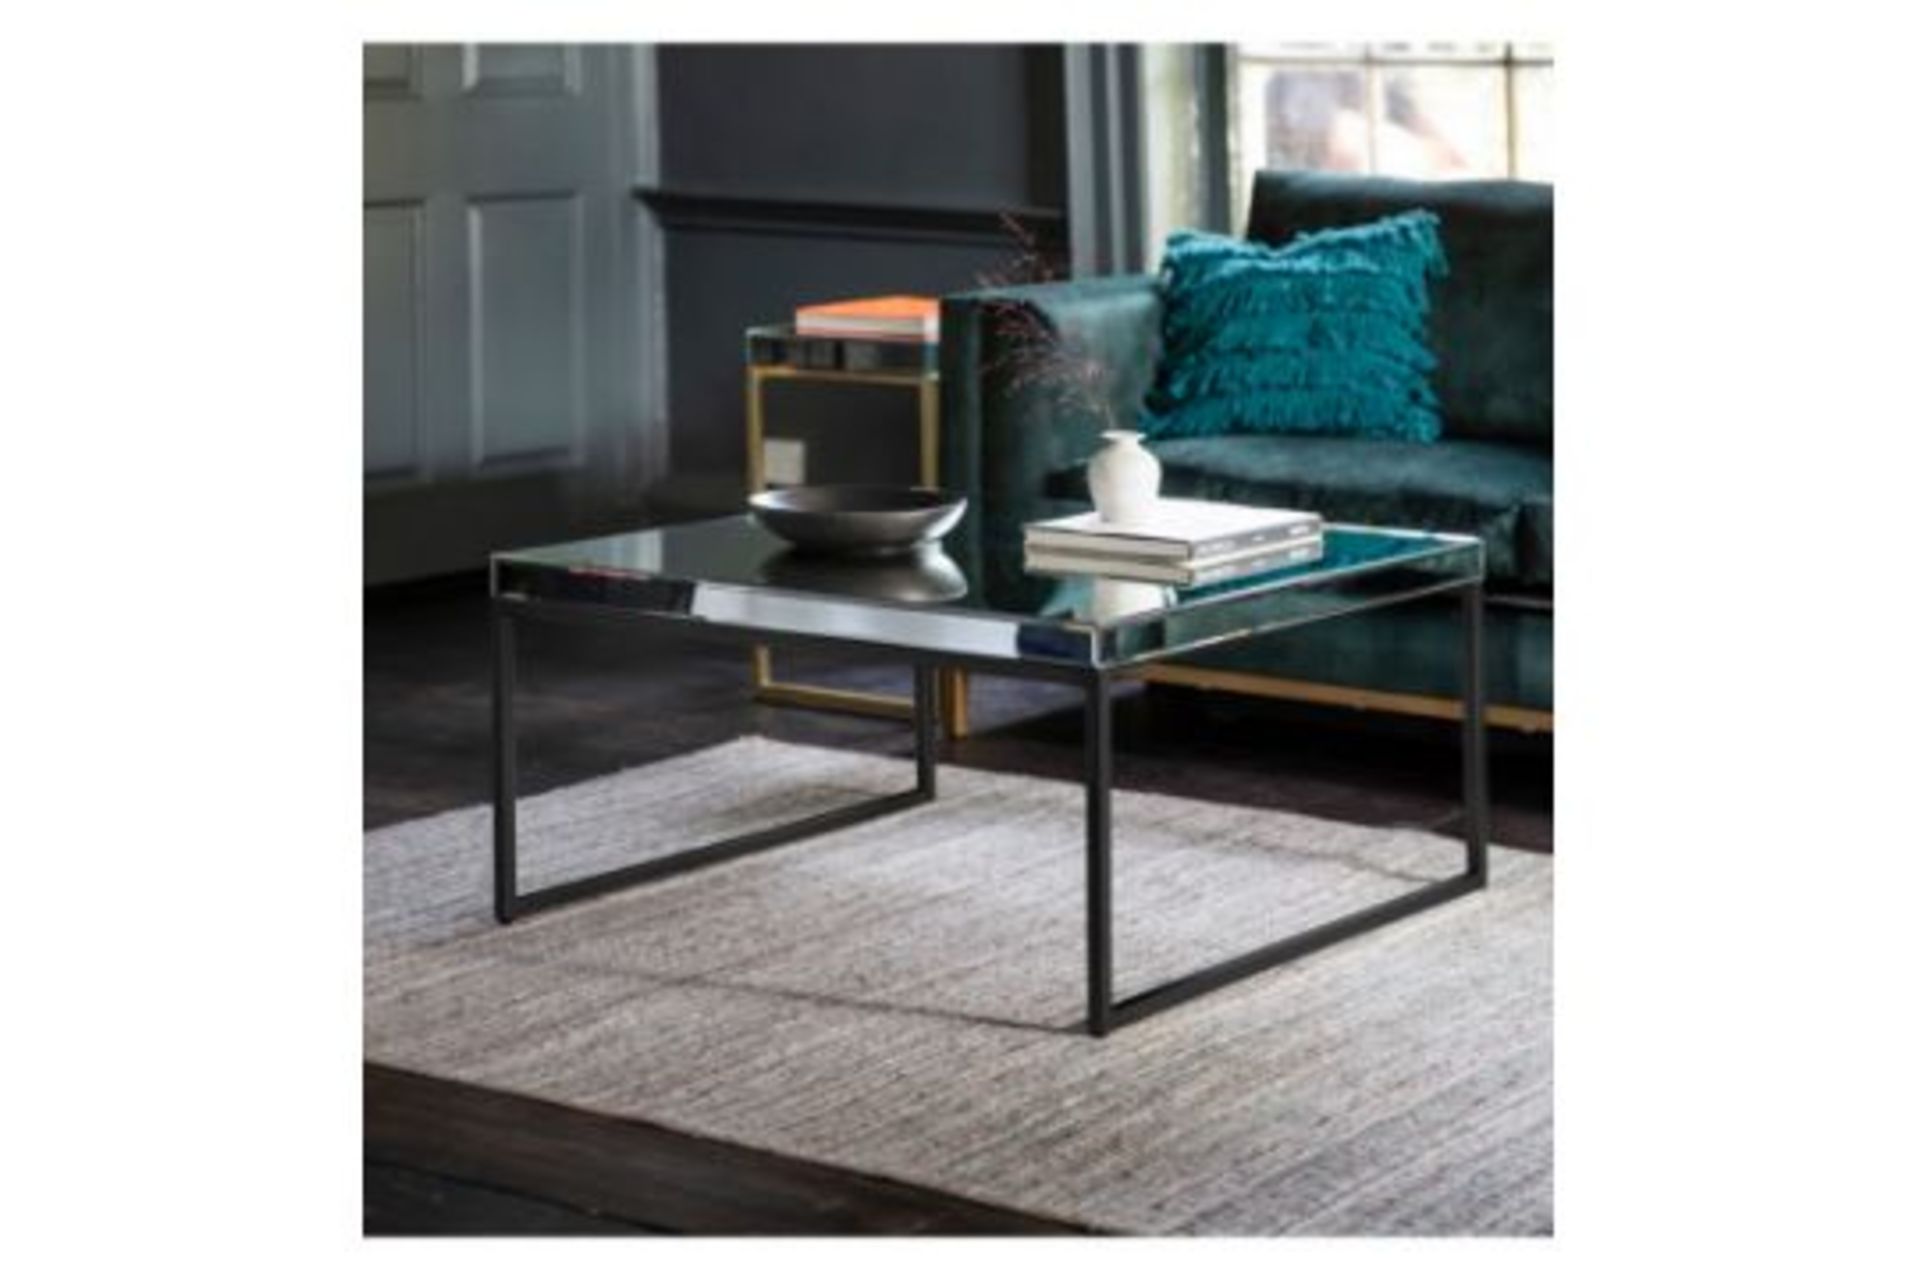 Pippard Coffee Table Black The Coffee Table In Black Features Beautiful Bevelled Mirror All Set